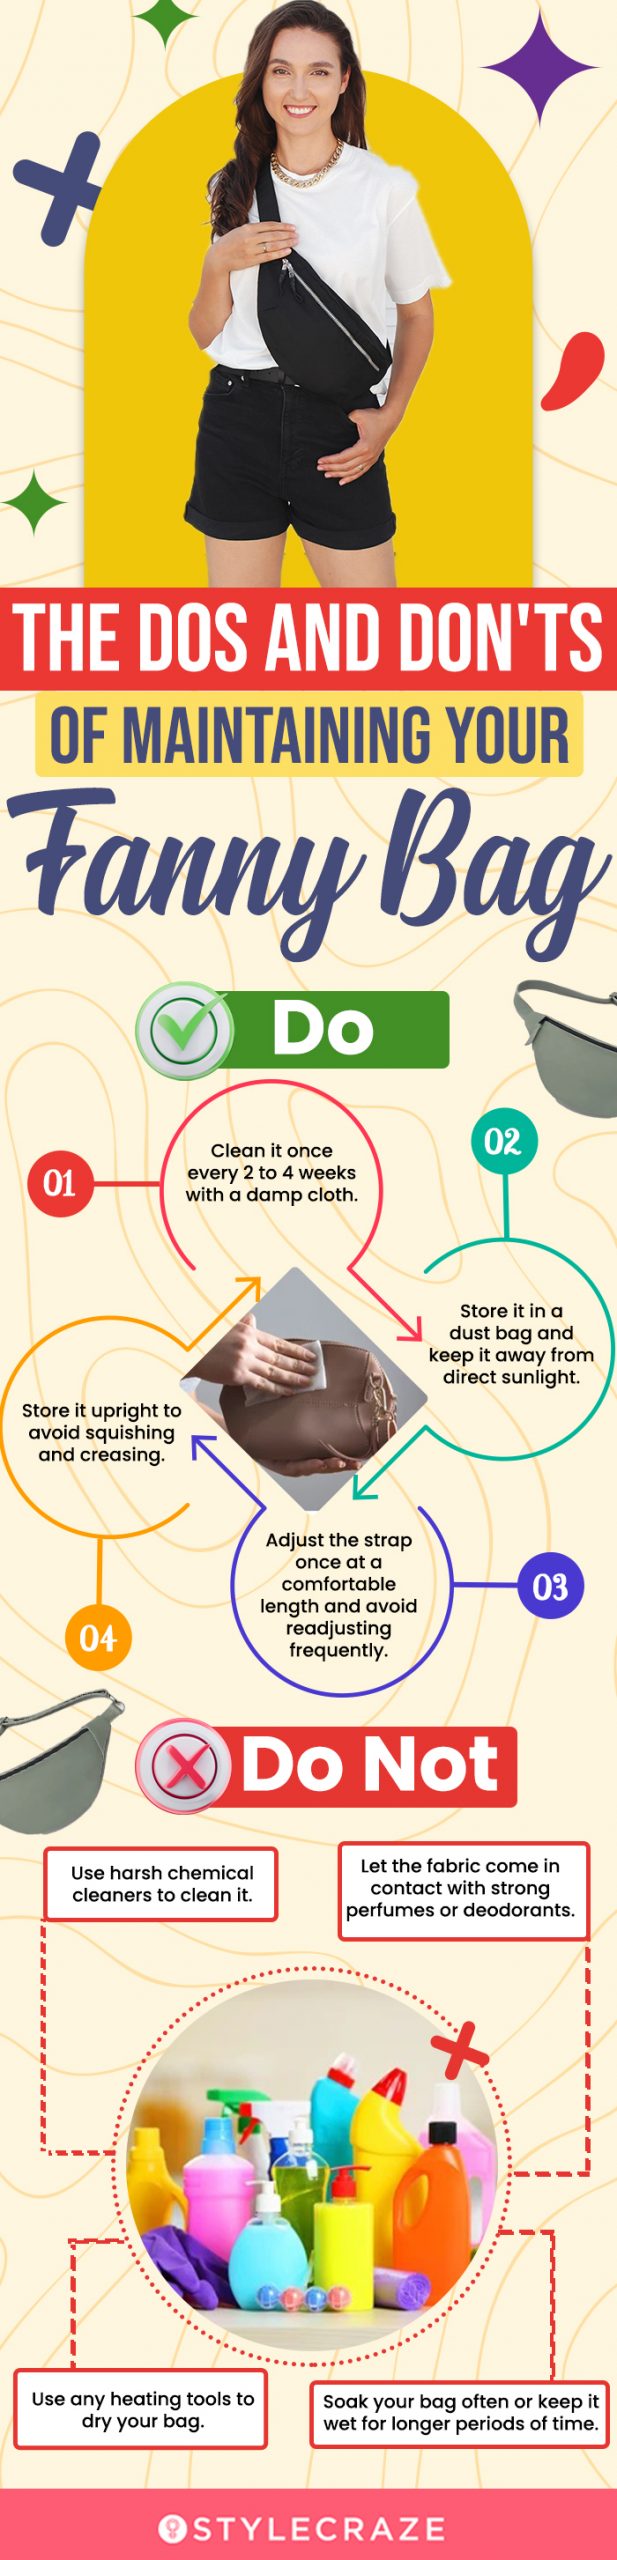 The Dos And Don'ts Of Maintaining Your Fanny Bag (infographic)